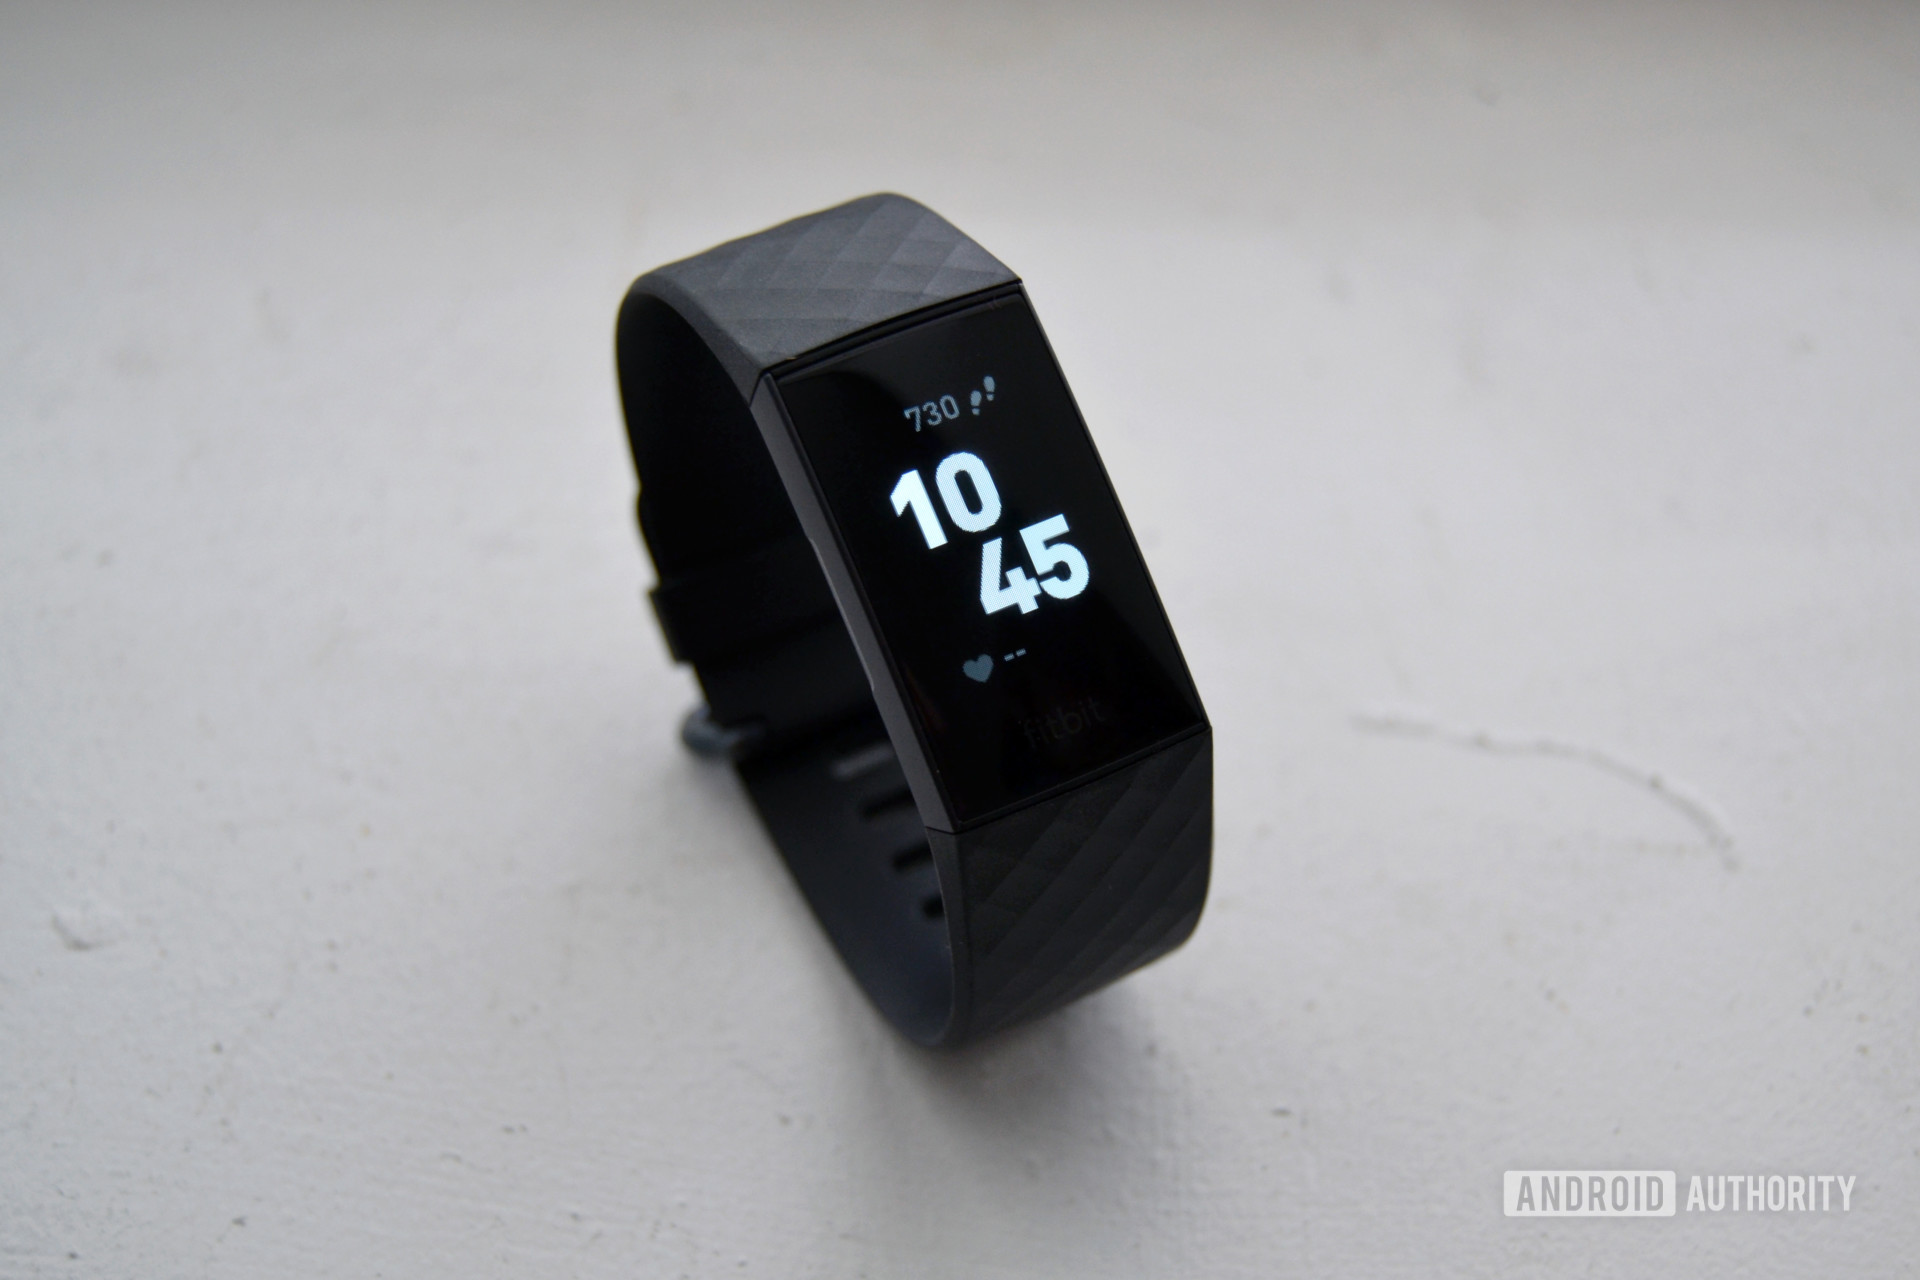 The new Charge 3 uses a special fitbit charge 3 charger that differs from the older models